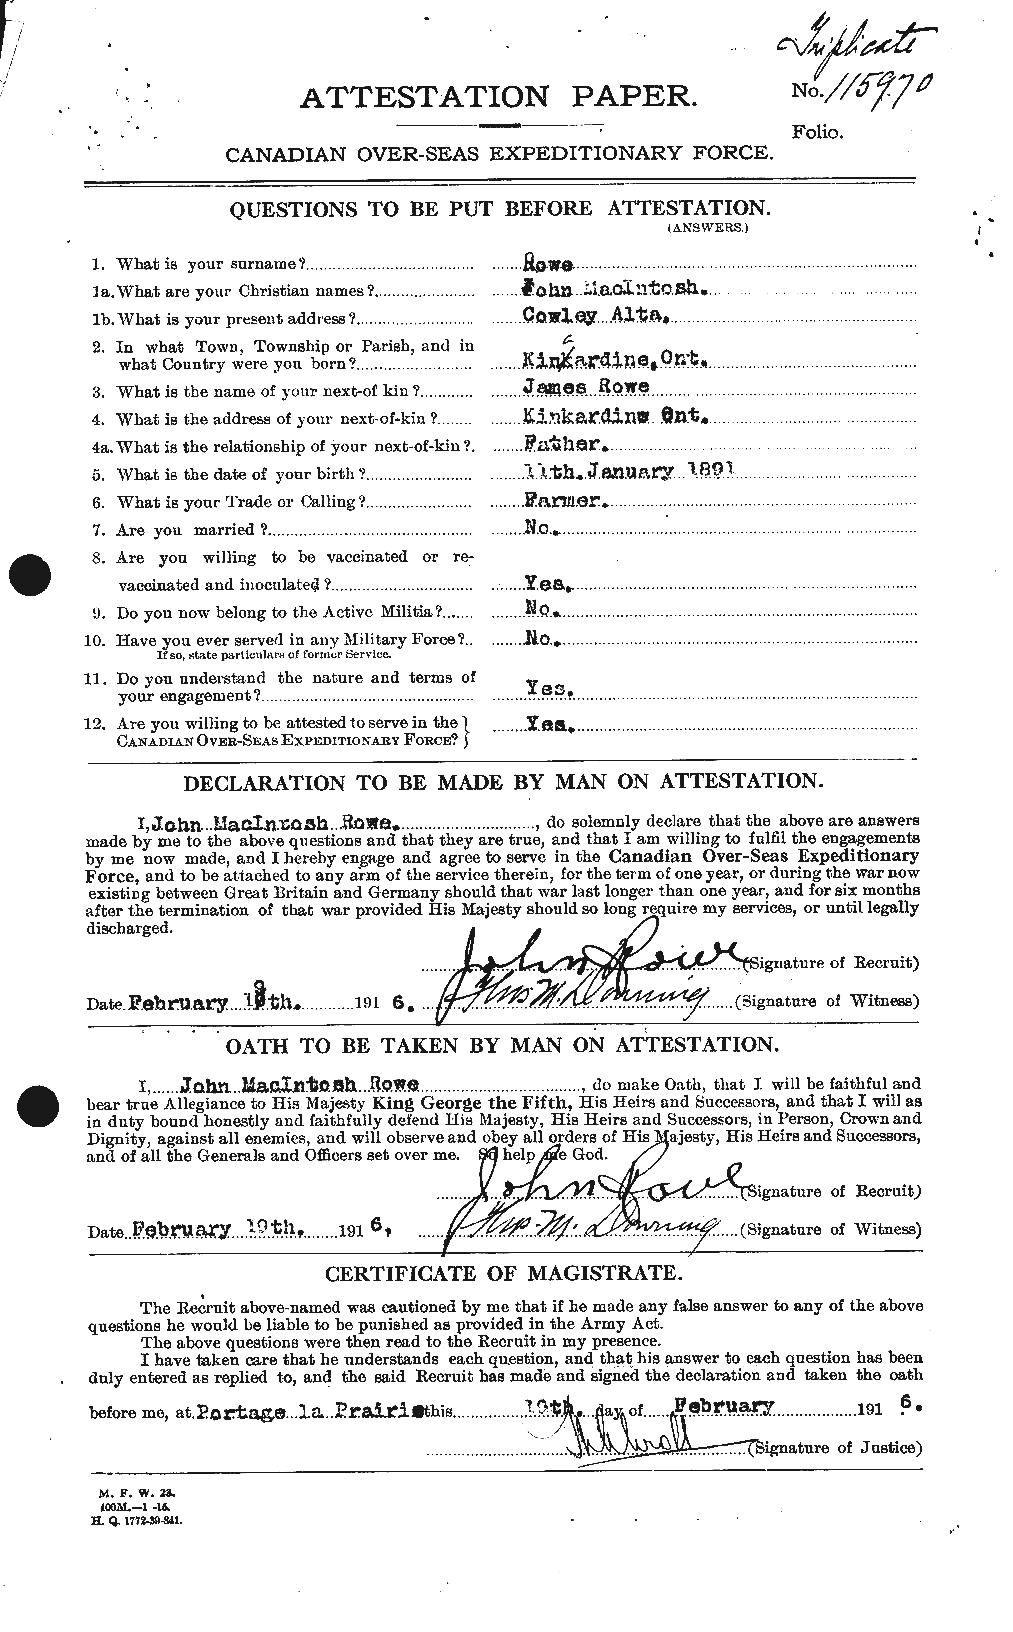 Personnel Records of the First World War - CEF 615931a